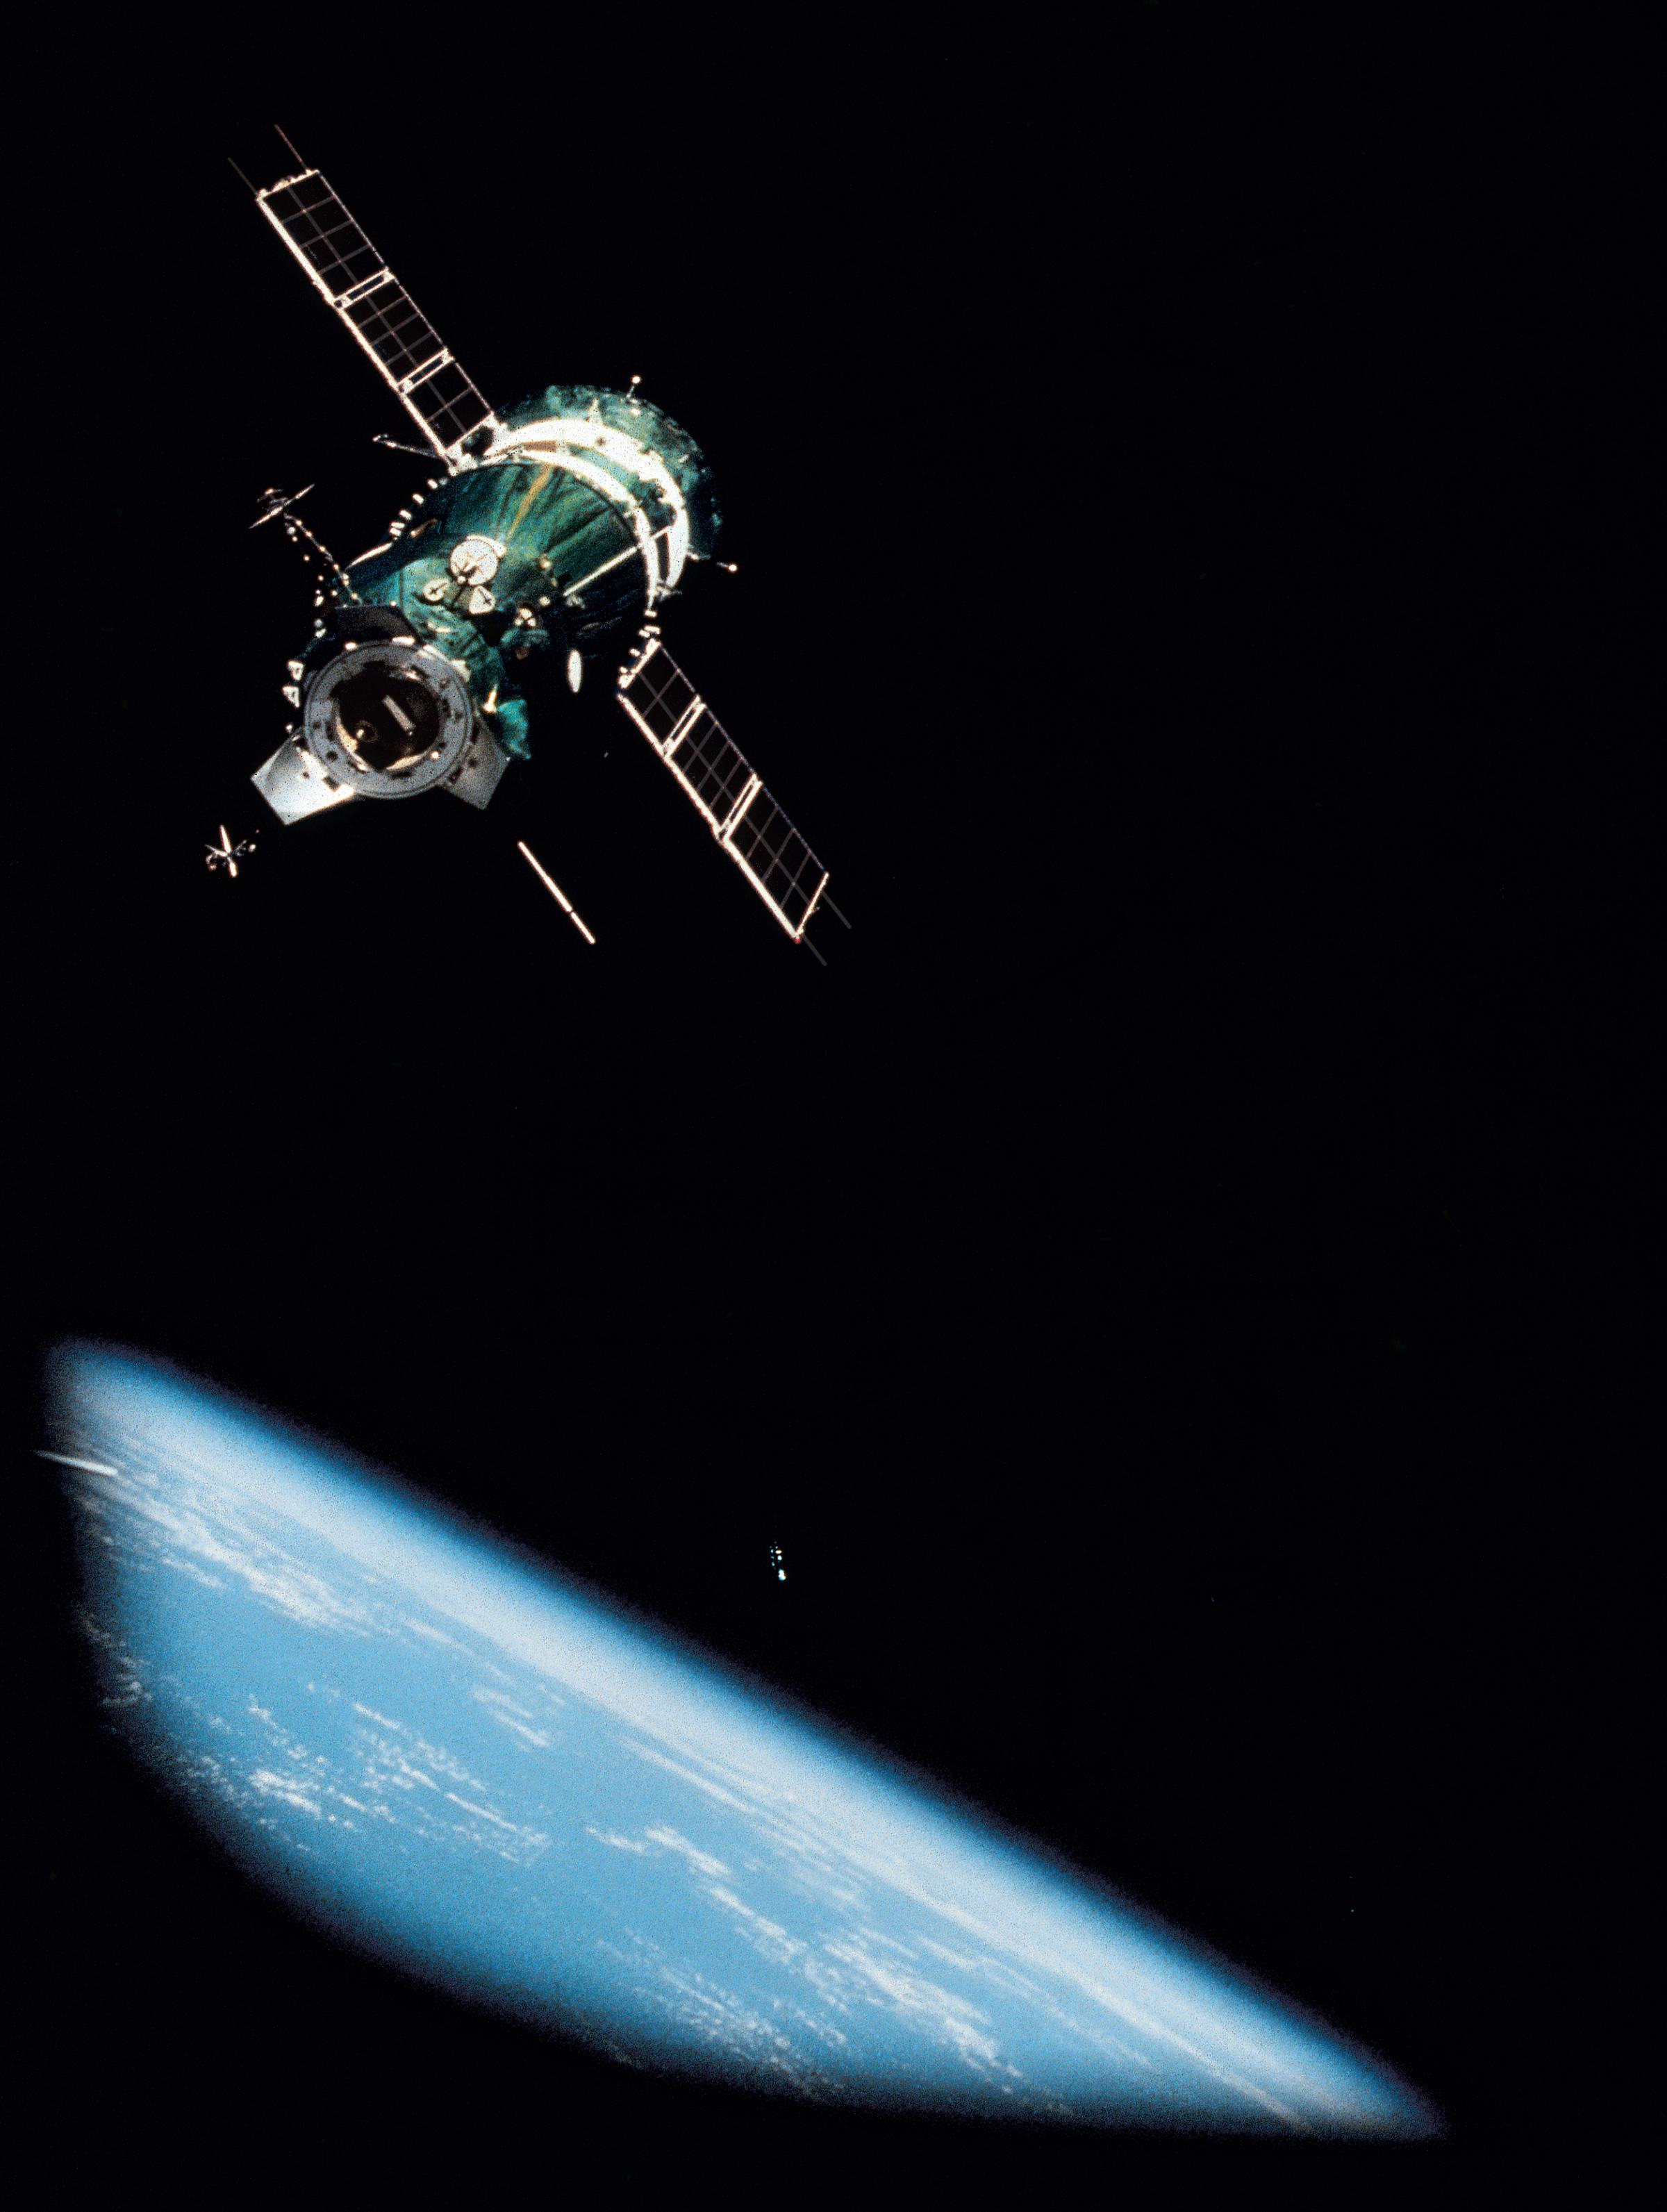 The Soviet Soyuz spacecraft approaches the Apollo for linkup in space, the first rendezvous and docking of vessels from different nations.